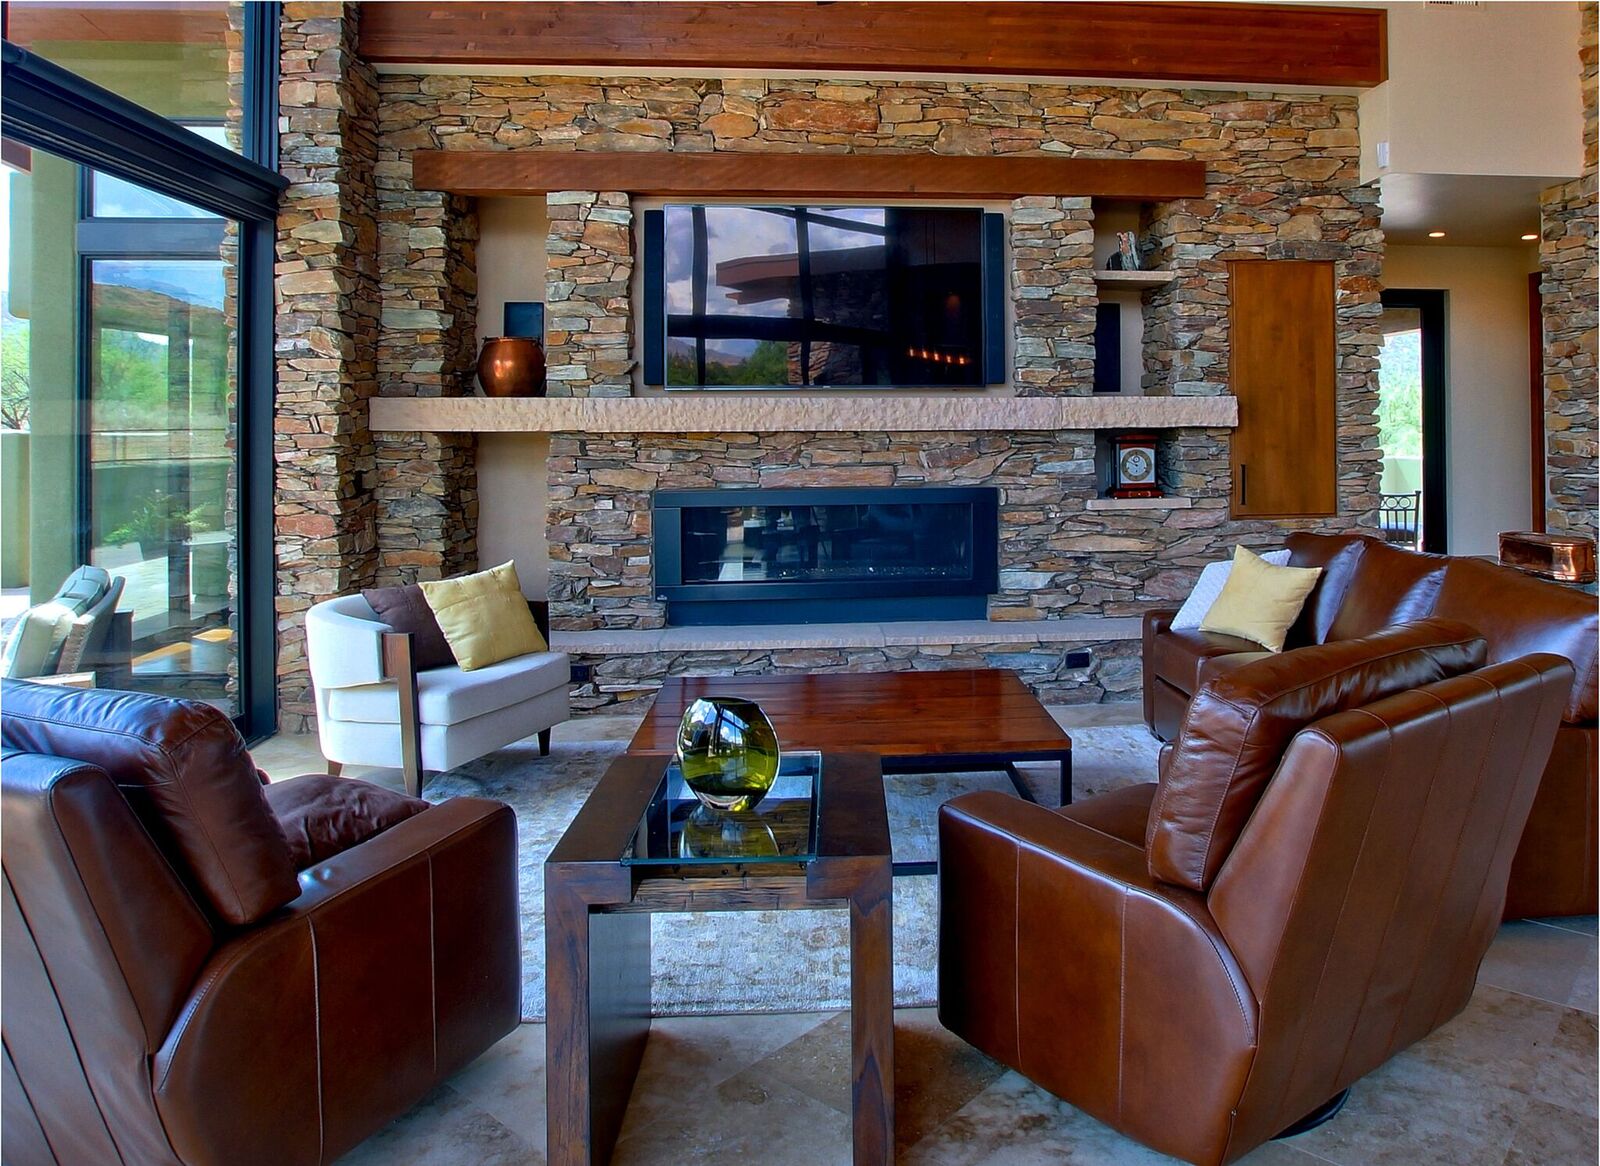 A living room with leather furniture and a fireplace.